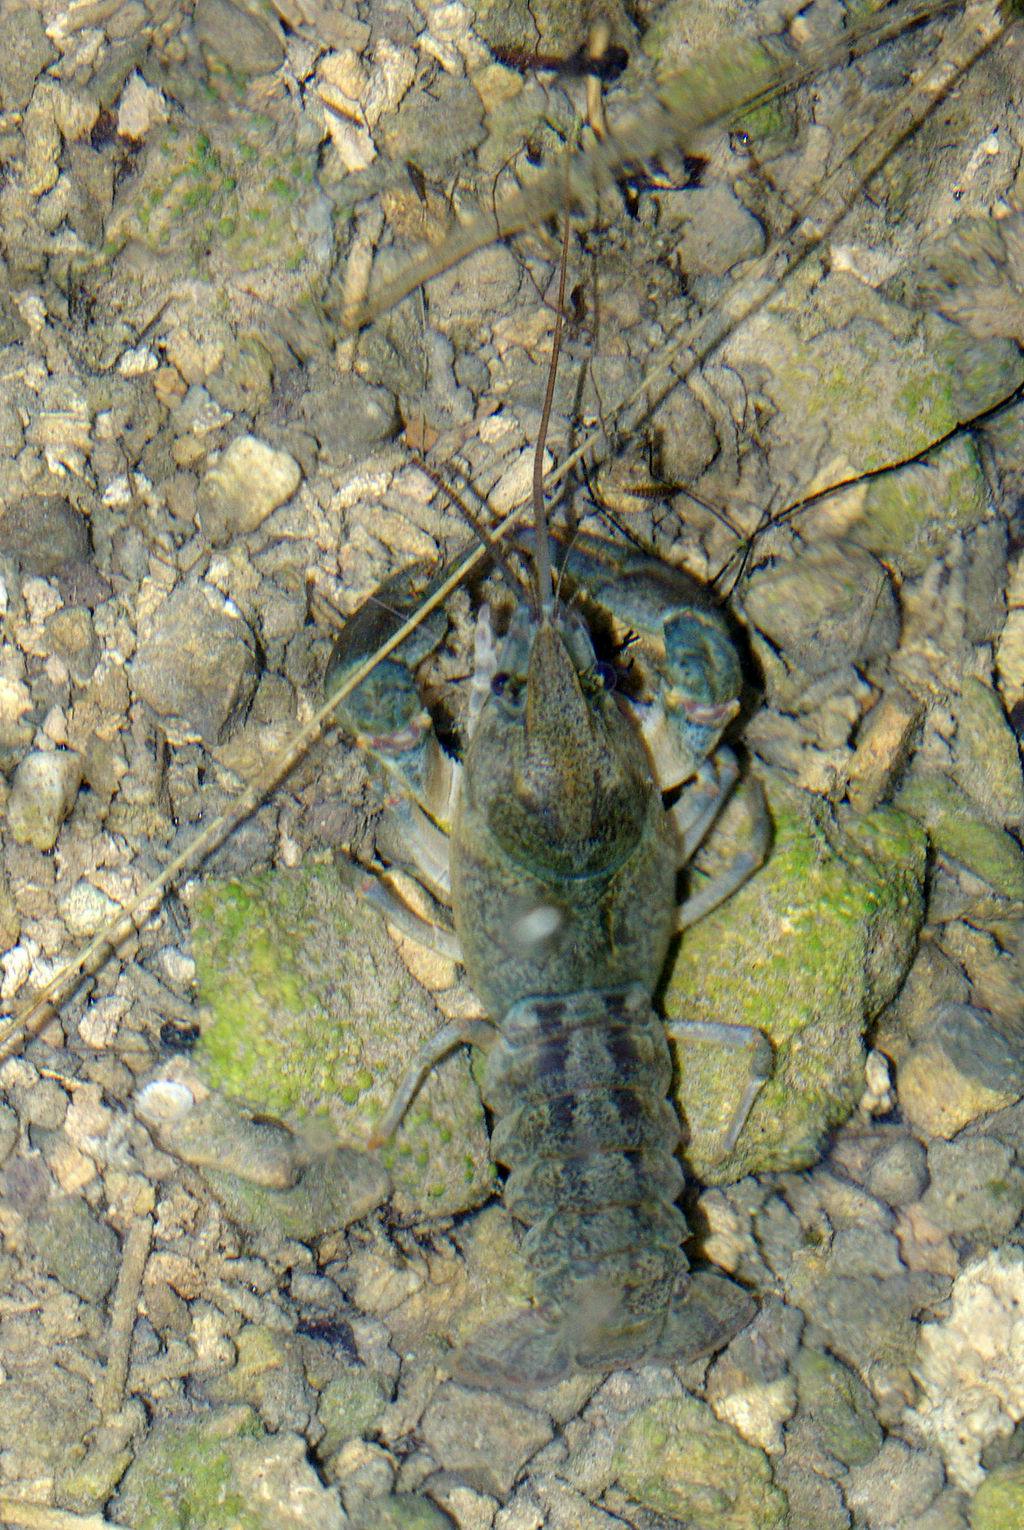 white-clawed crayfish on the riverbed